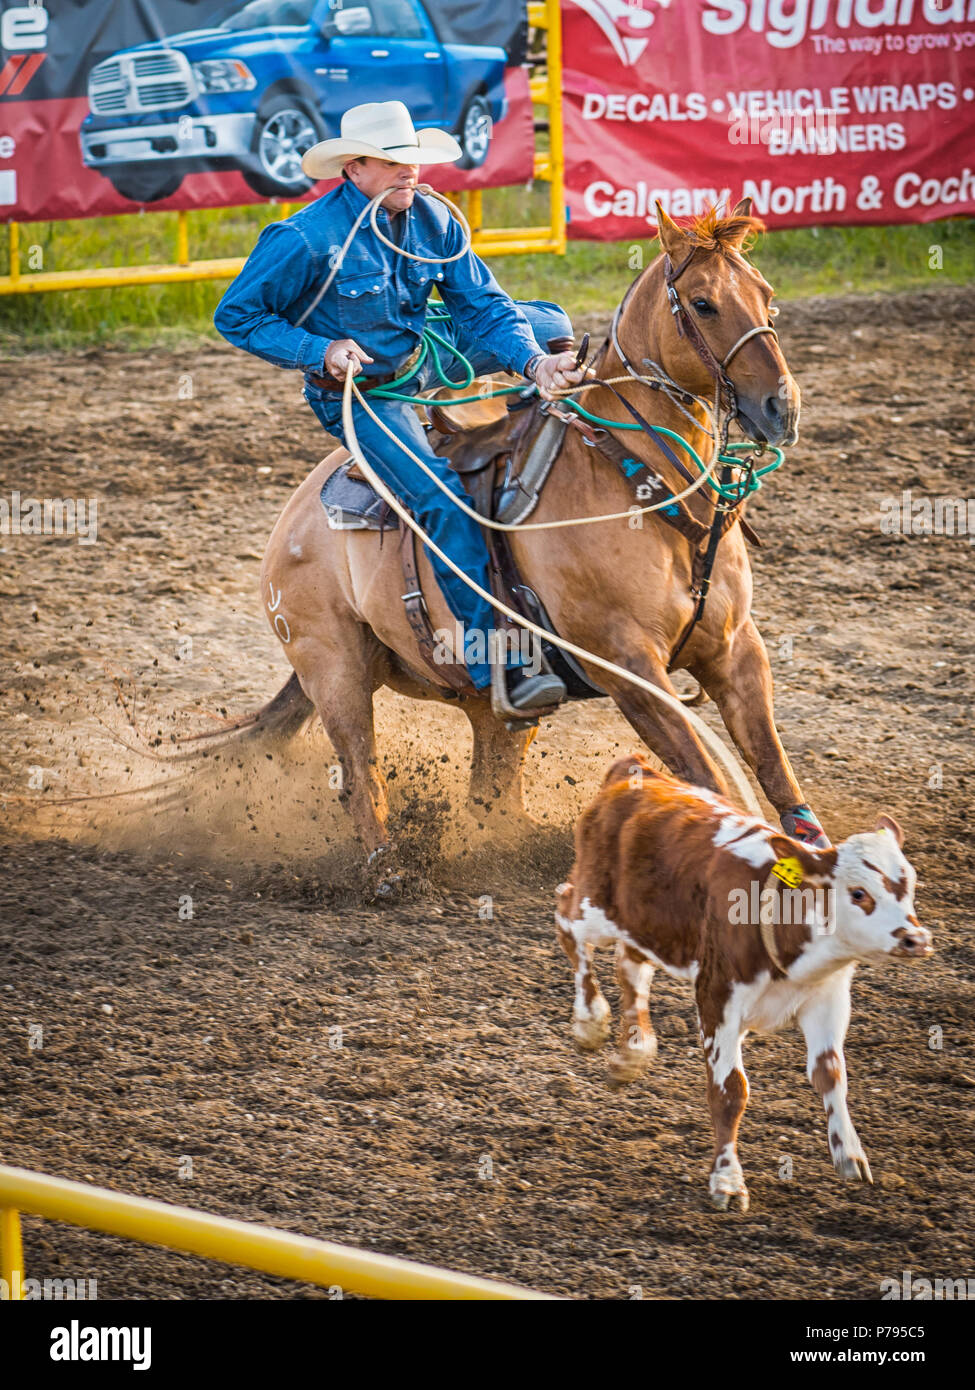 A cowboy ropes a calf during the tie down roping competition at the Airdrie Pro Rodeo. Stock Photo